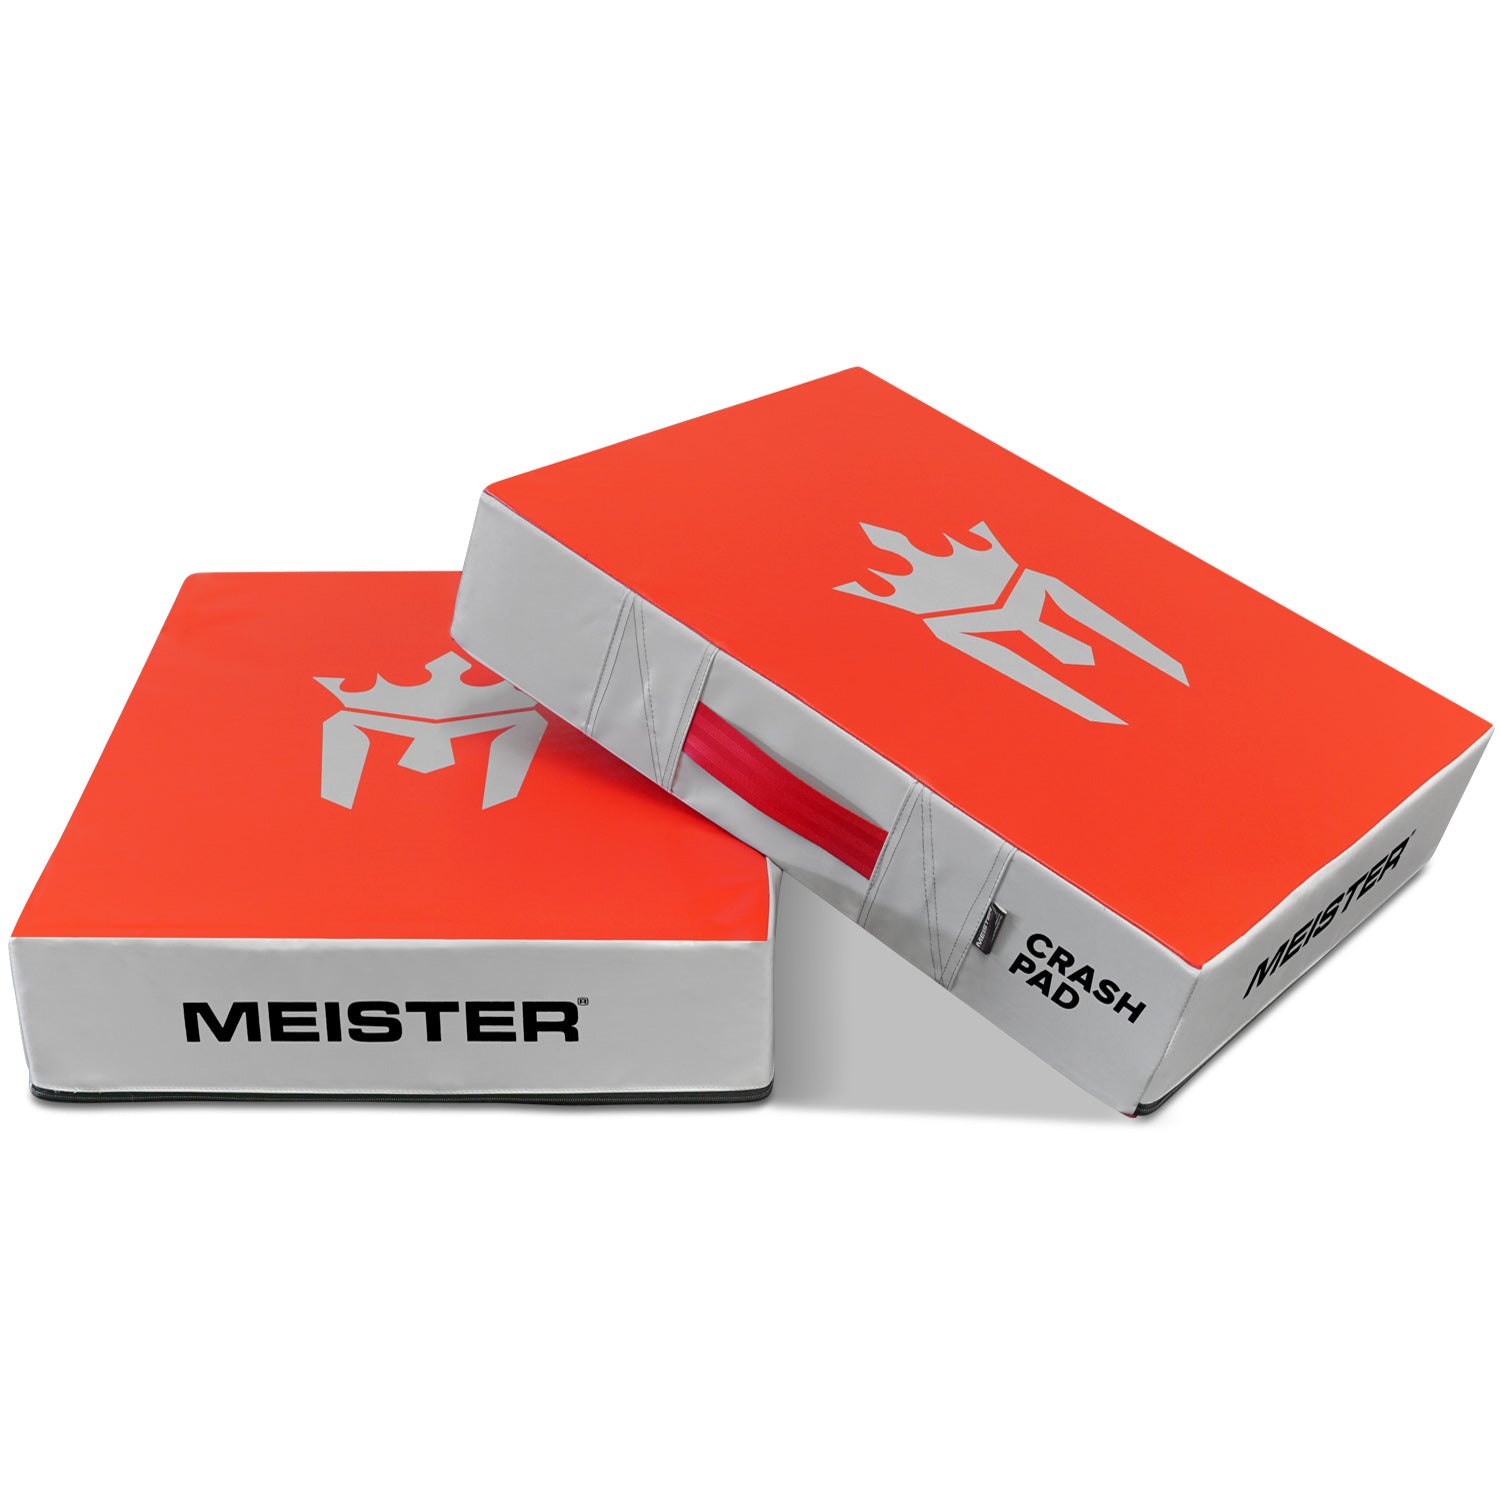 Meister Crash Pad Weight Lifting Drop Pads - Red/Gray (Pair)